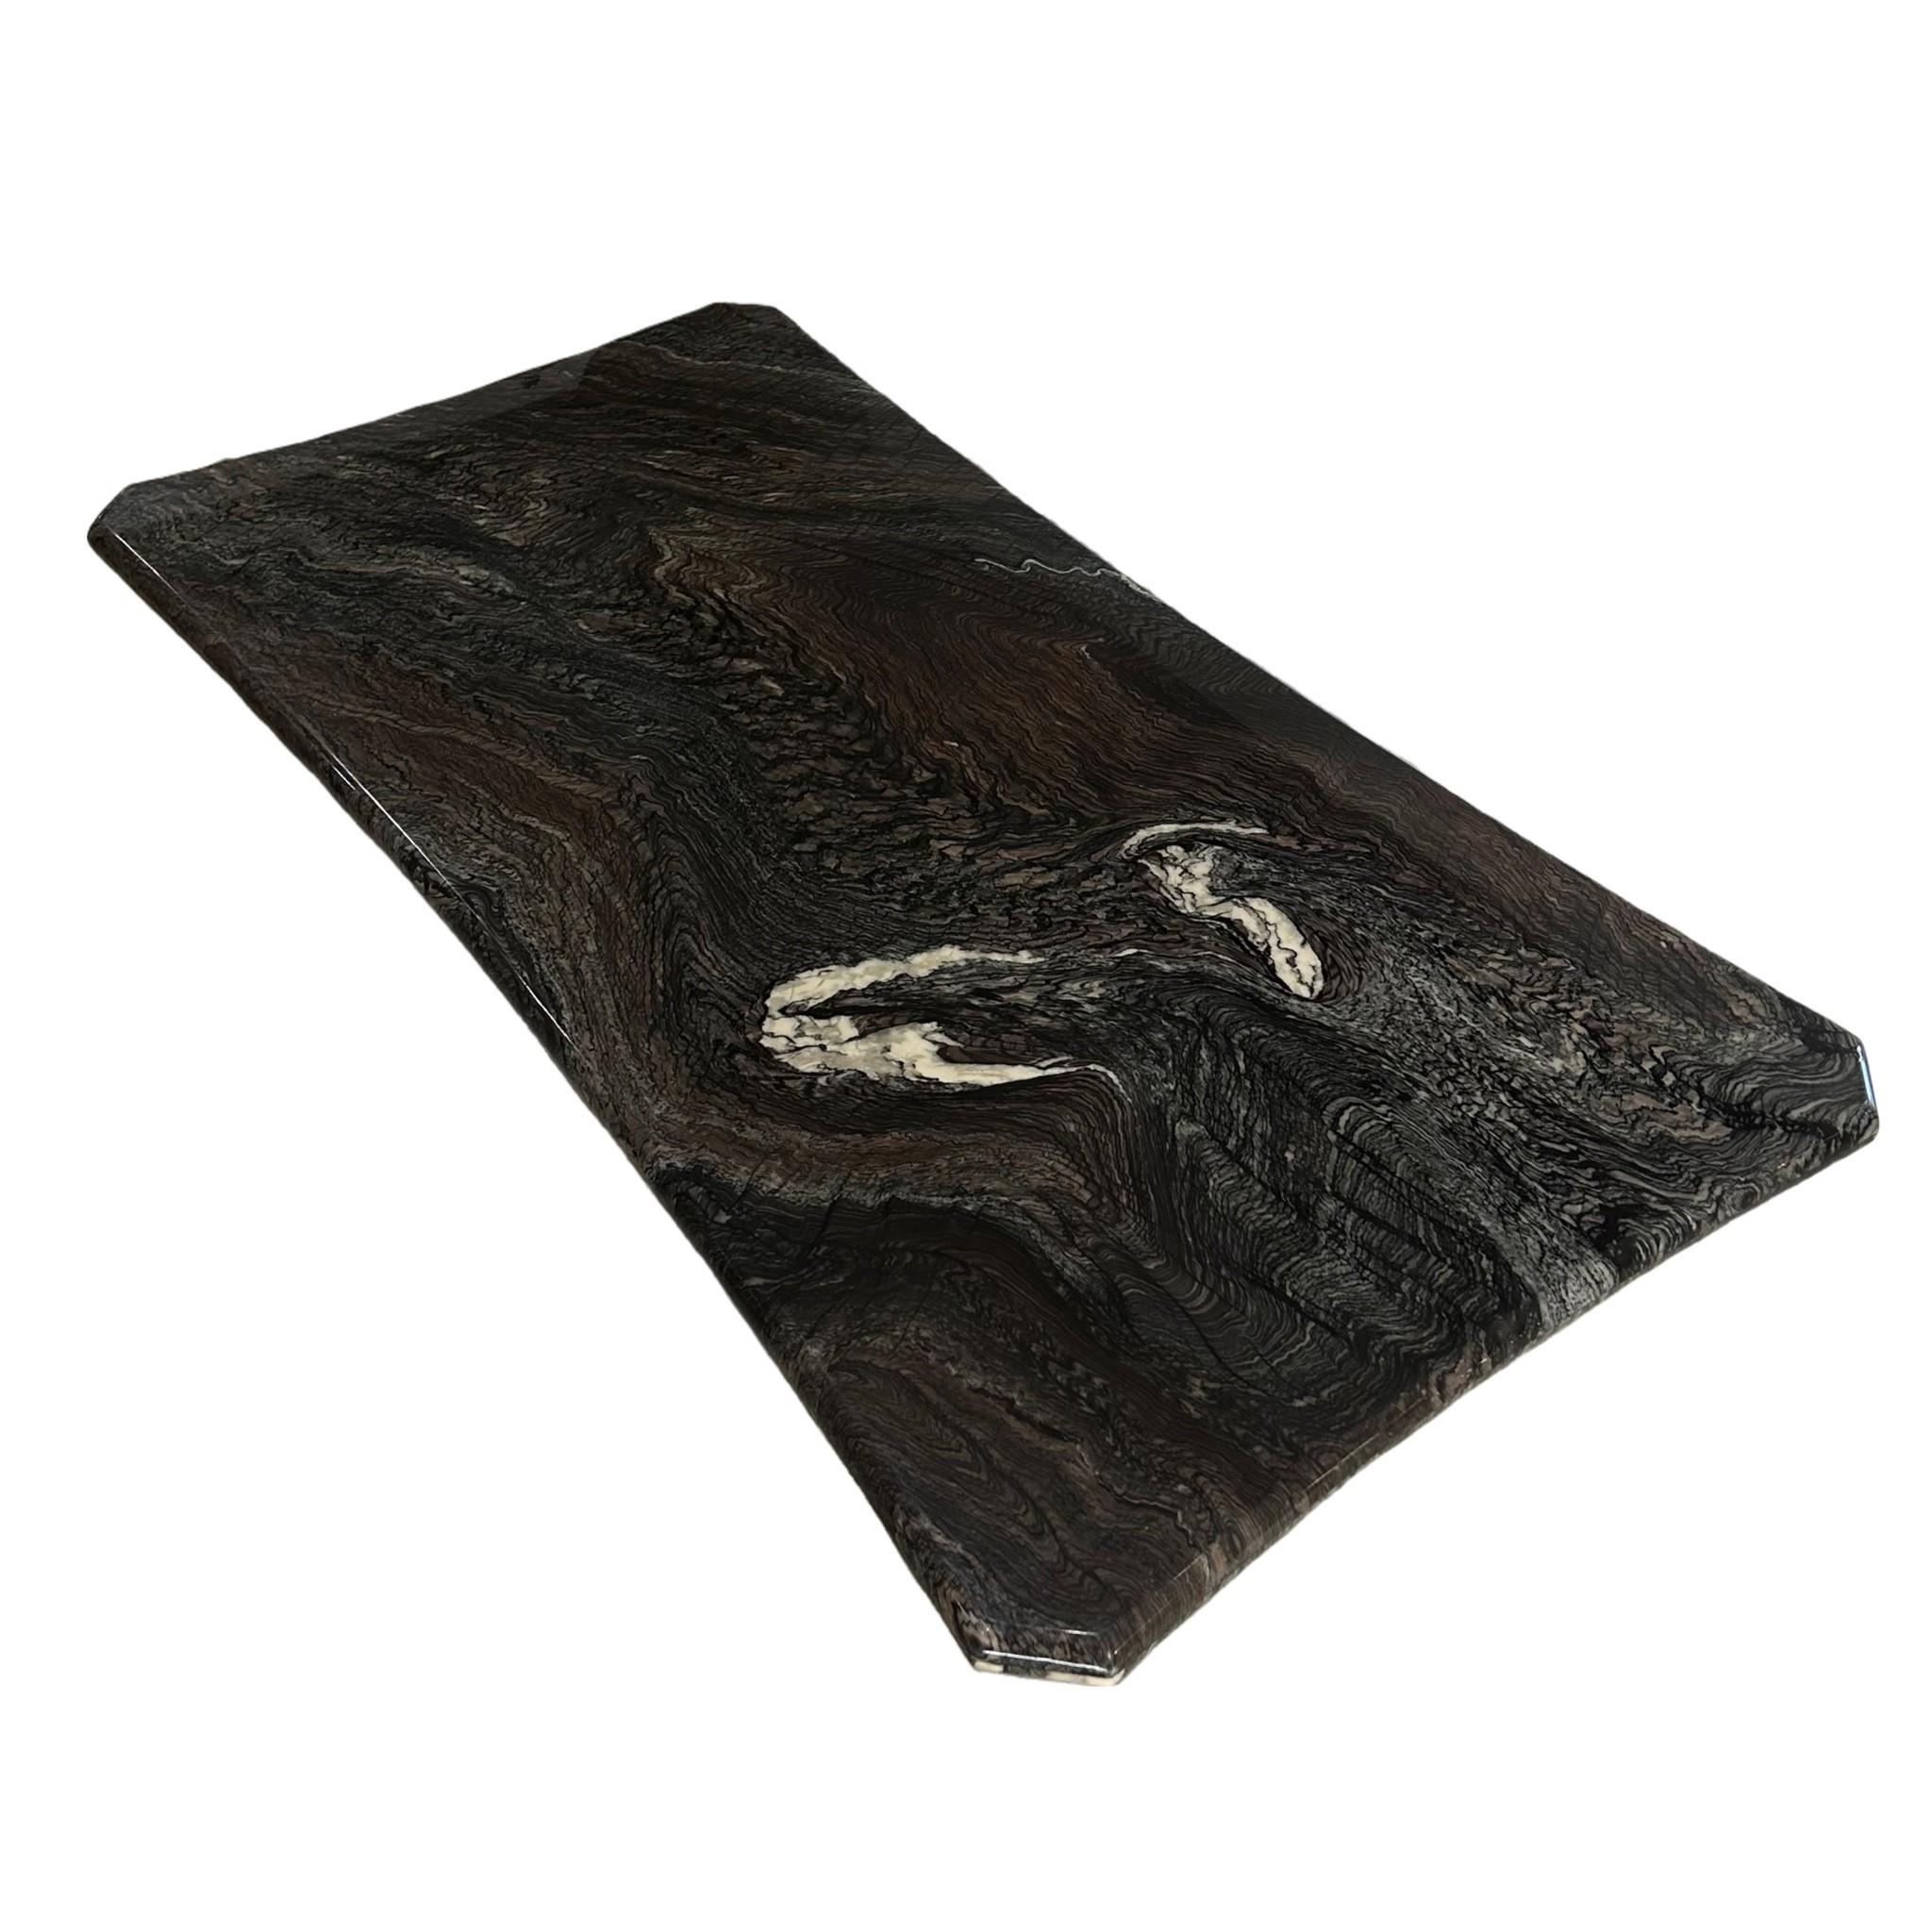 Black & Brown Marble With White Veins

One Of A Kind Table With Incredible Curves & Shape

Slotted Base adds to an even more interesting design

Base Has Similar Shape to its' Marble Top

Incredible Marble Detailing is showcased in every inch of